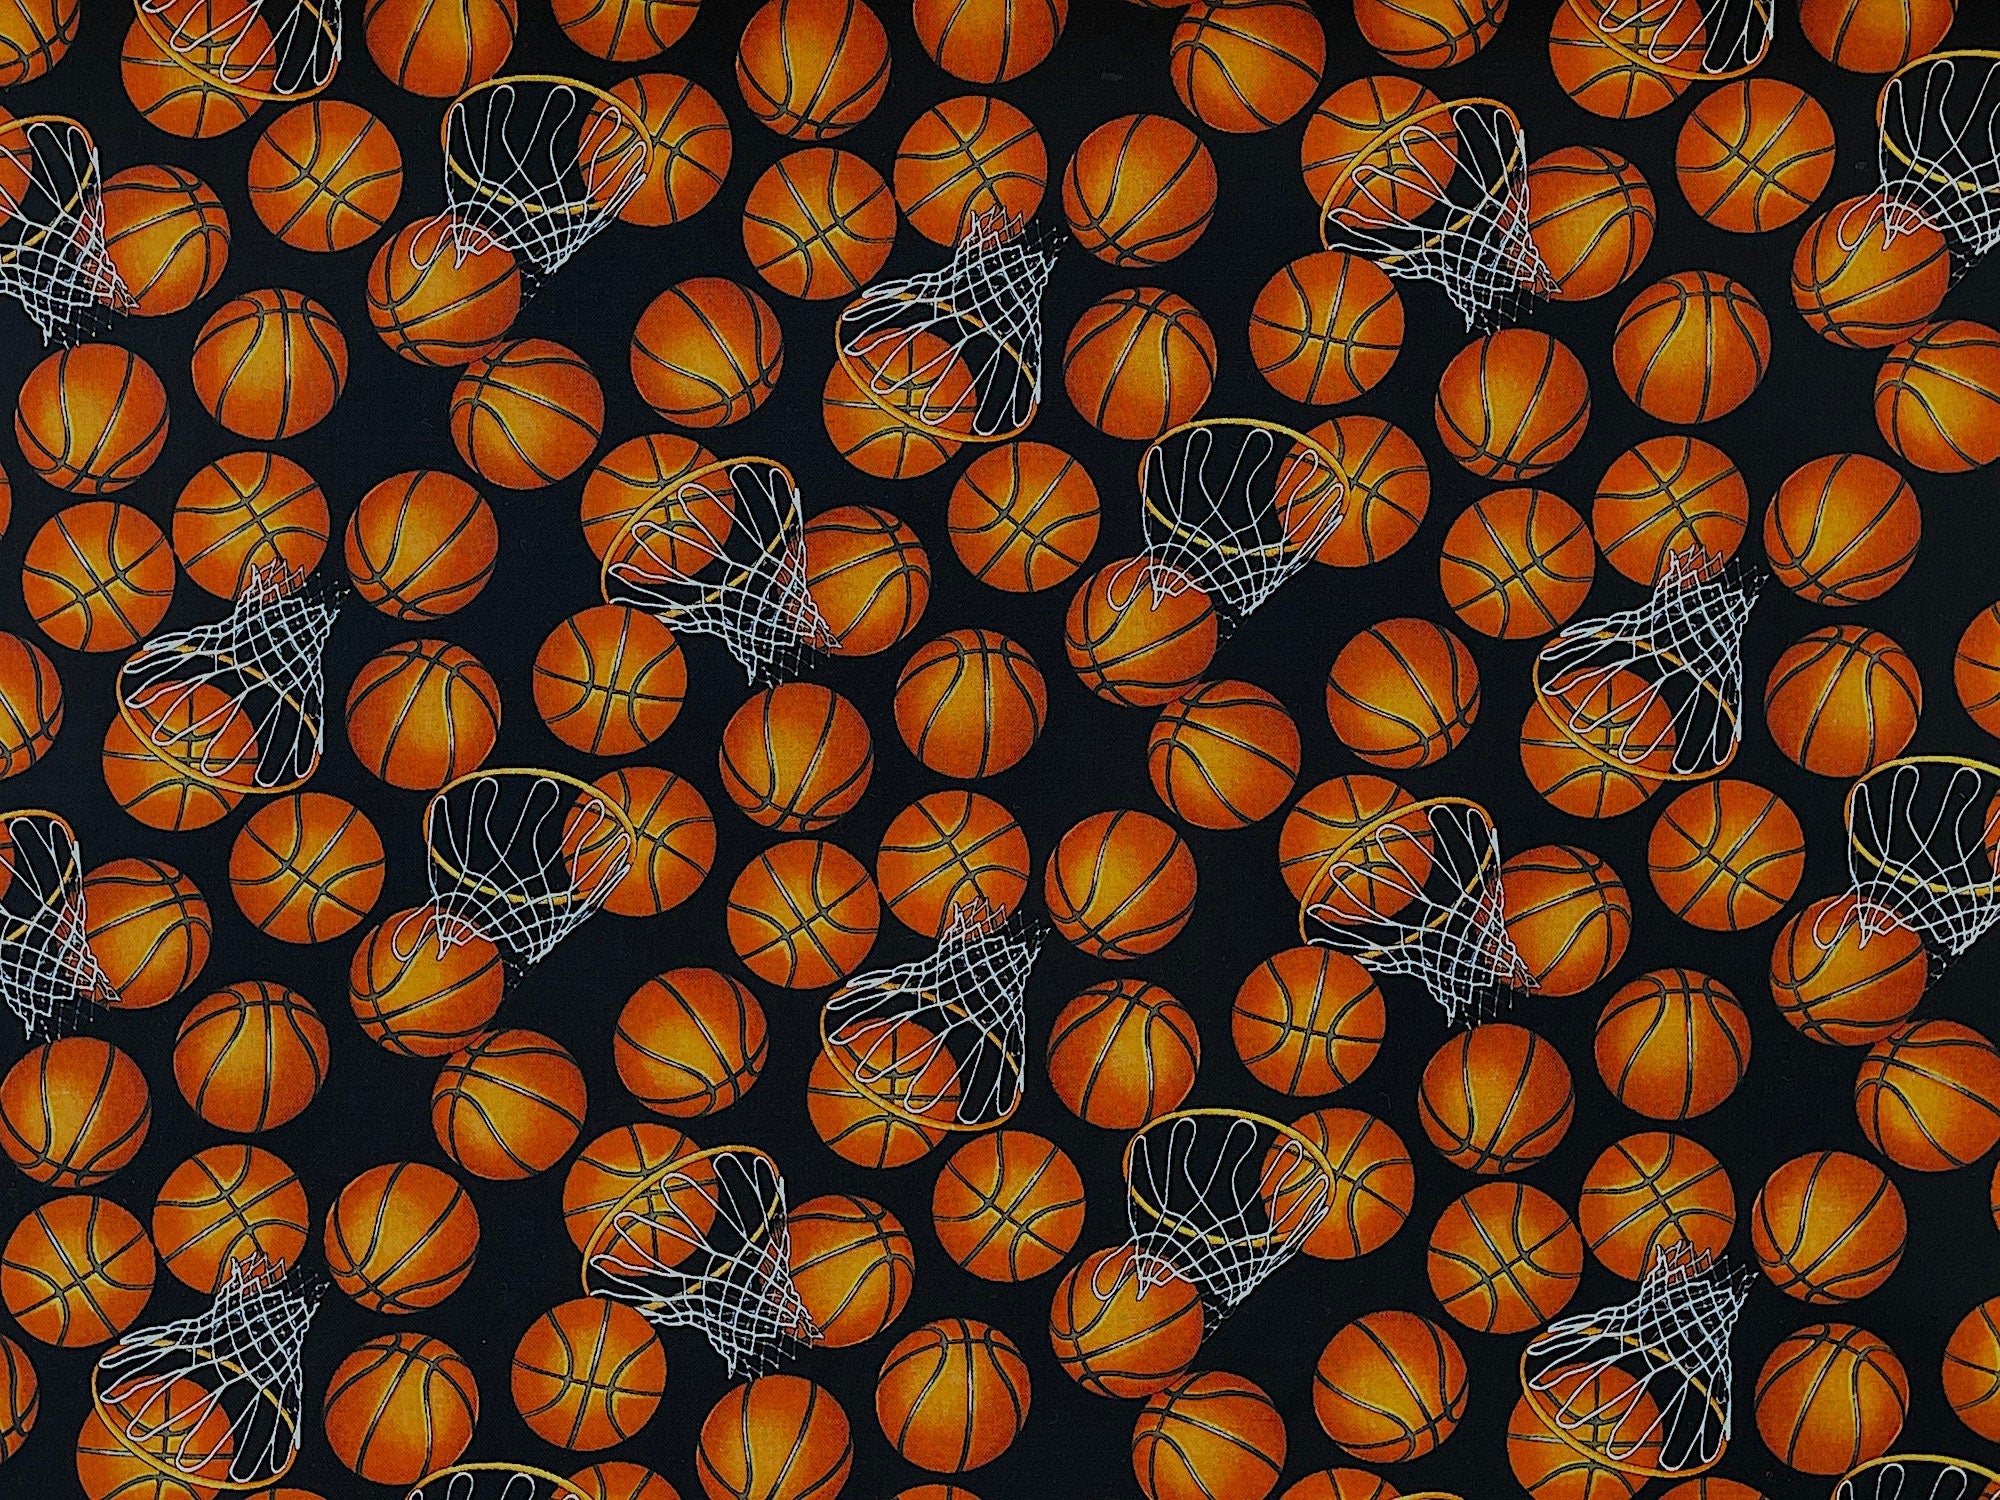 This black fabric is covered with orange basketballs and hoops.